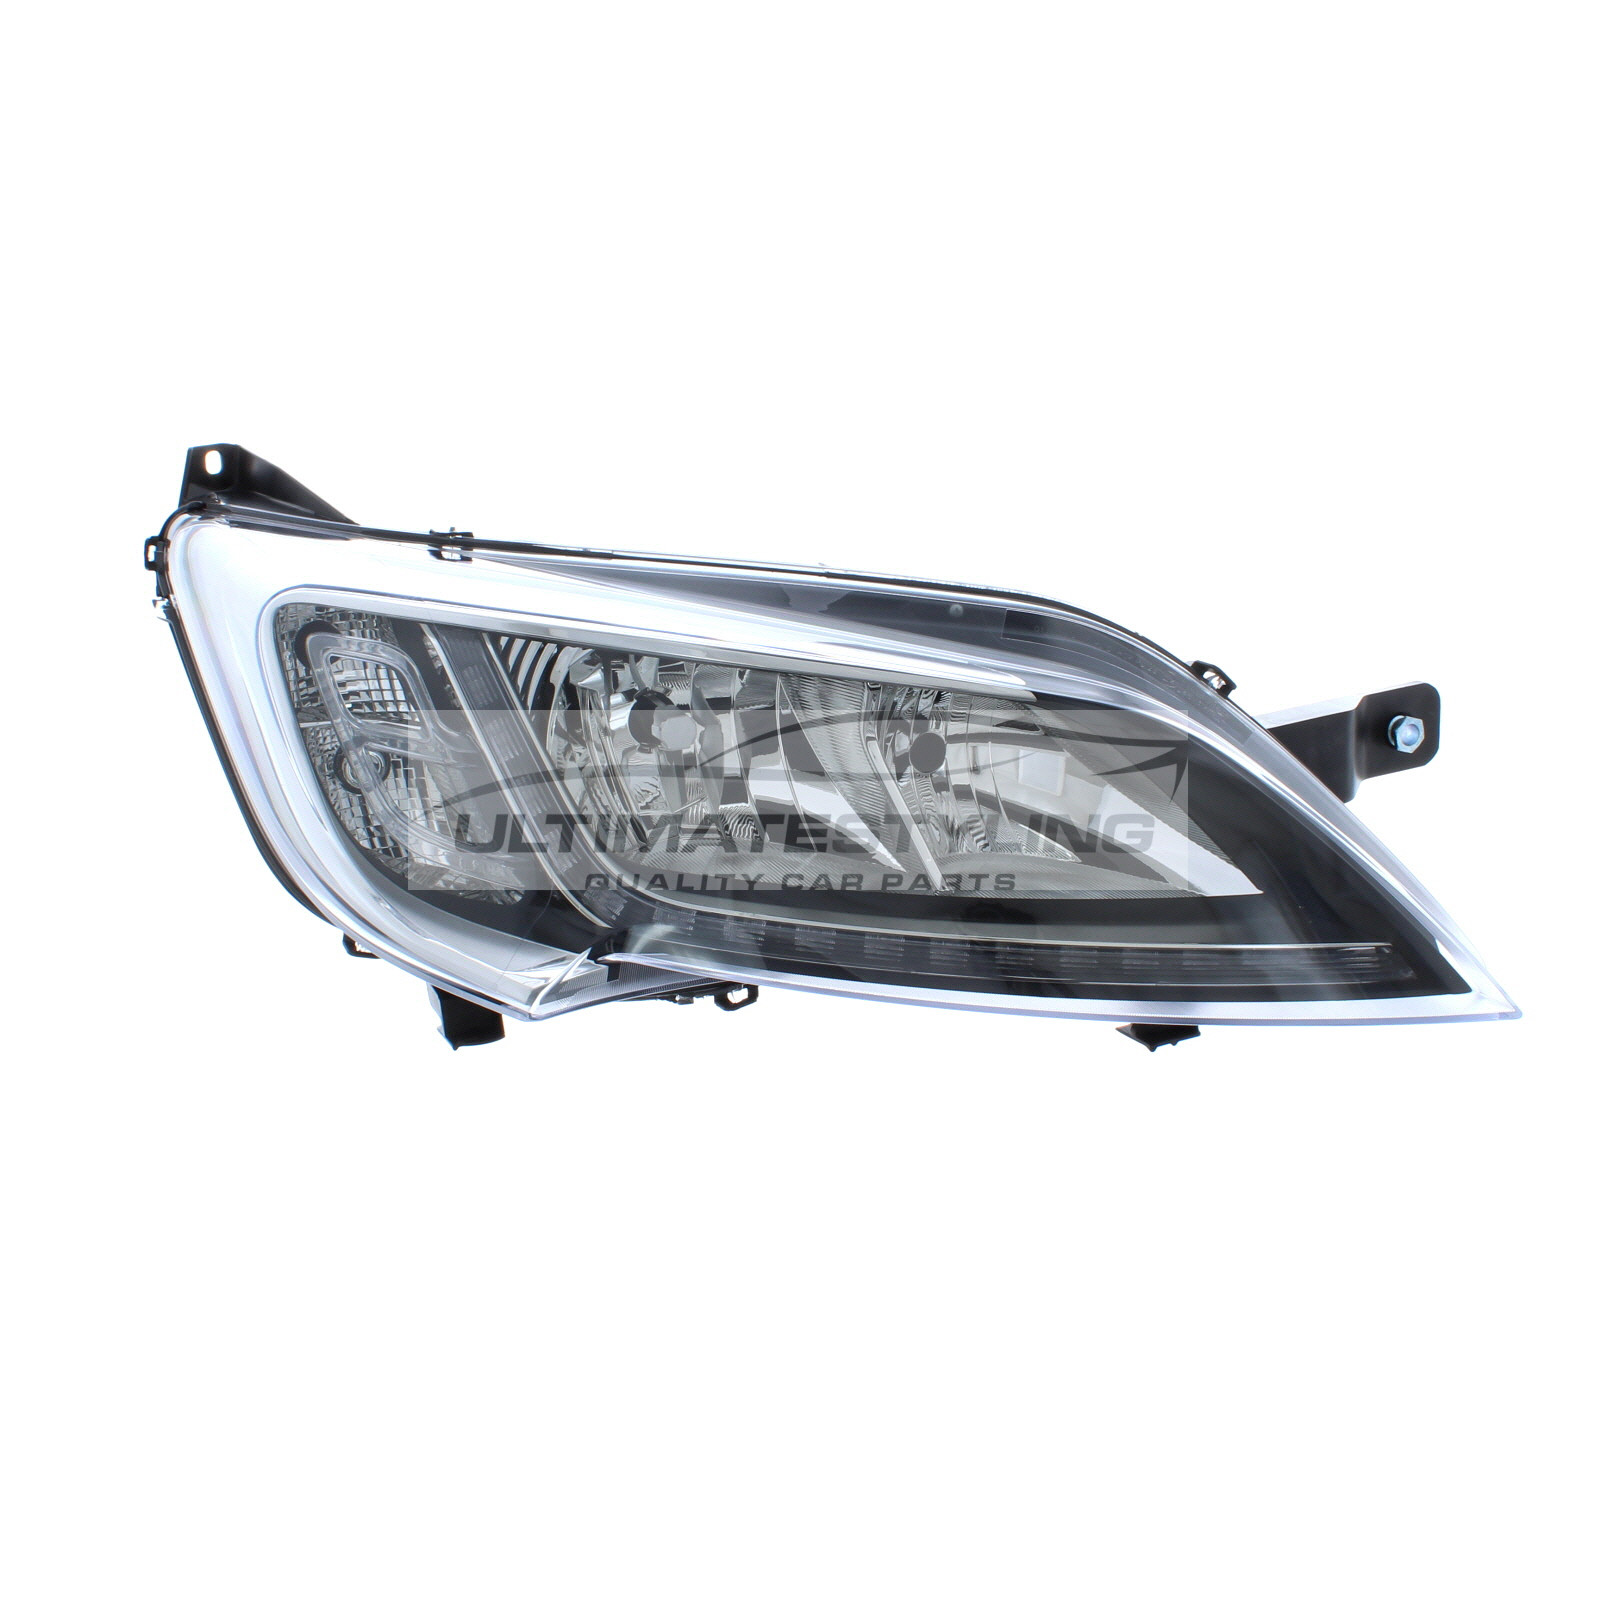 Citroen Relay 2014->, Fiat Ducato 2014-> Halogen With LED Daytime Running Lamp, Electric With Motor, Chrome Headlight / Headlamp Drivers Side (RH)